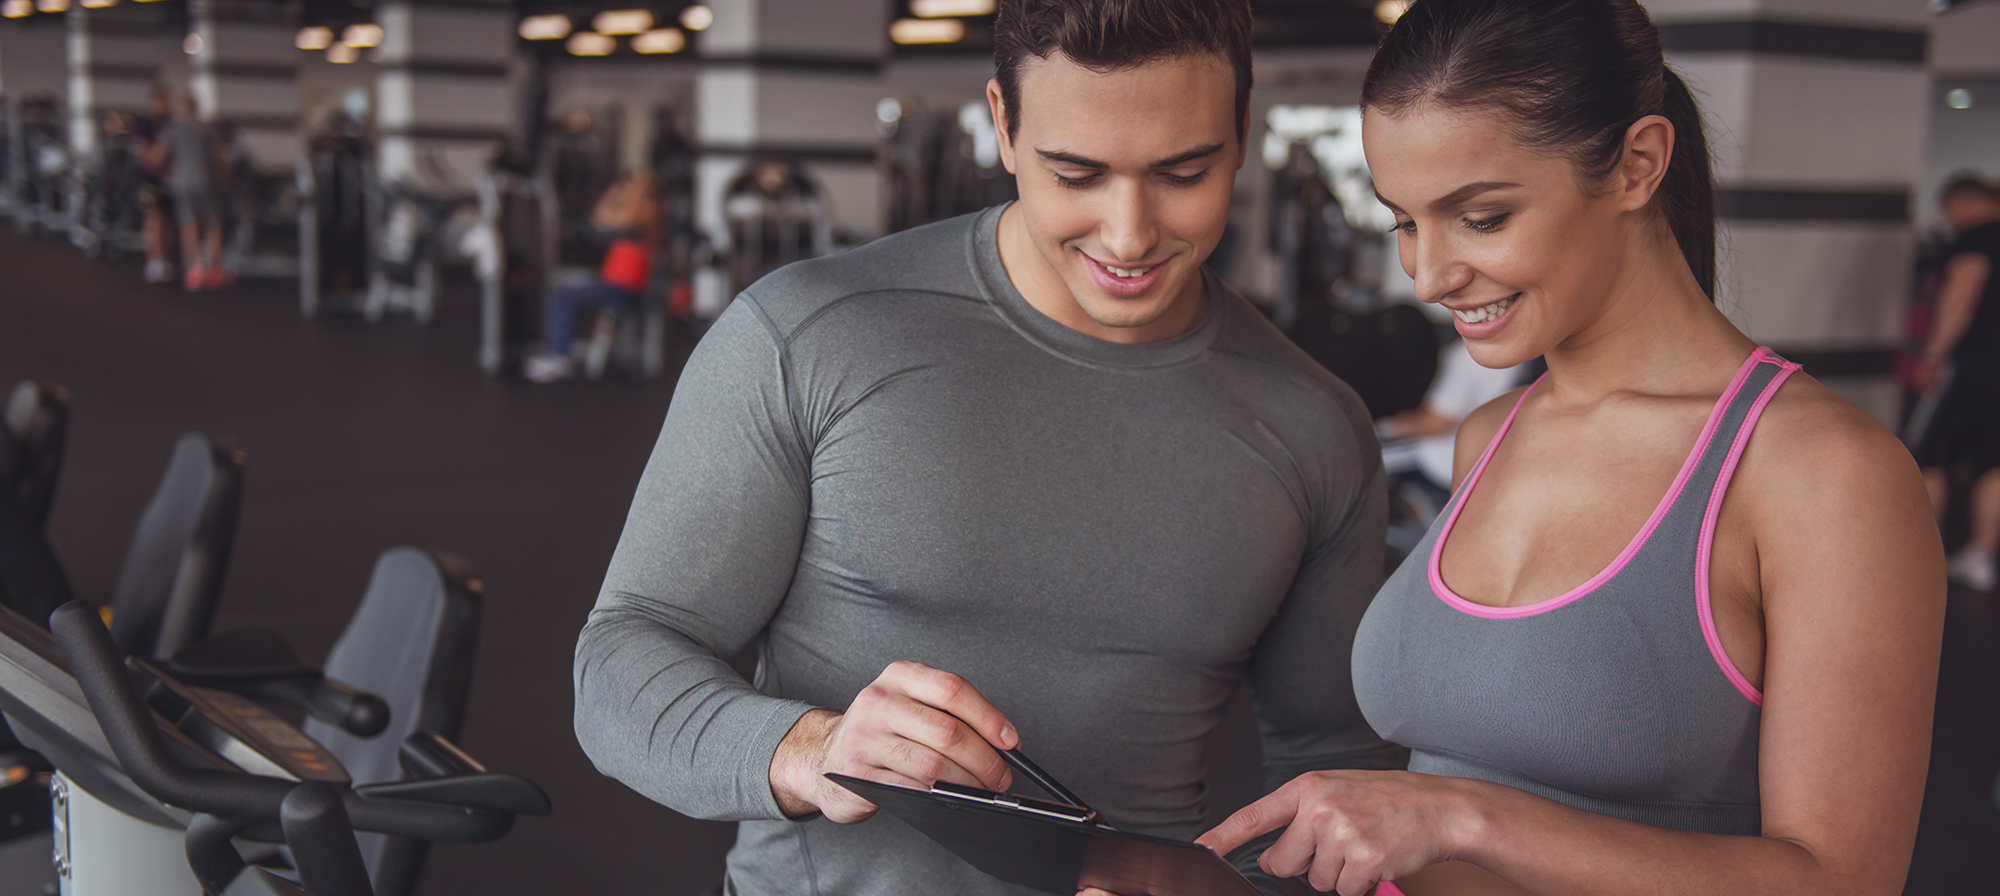 Insurance for Gyms and Health & Fitness Clubs